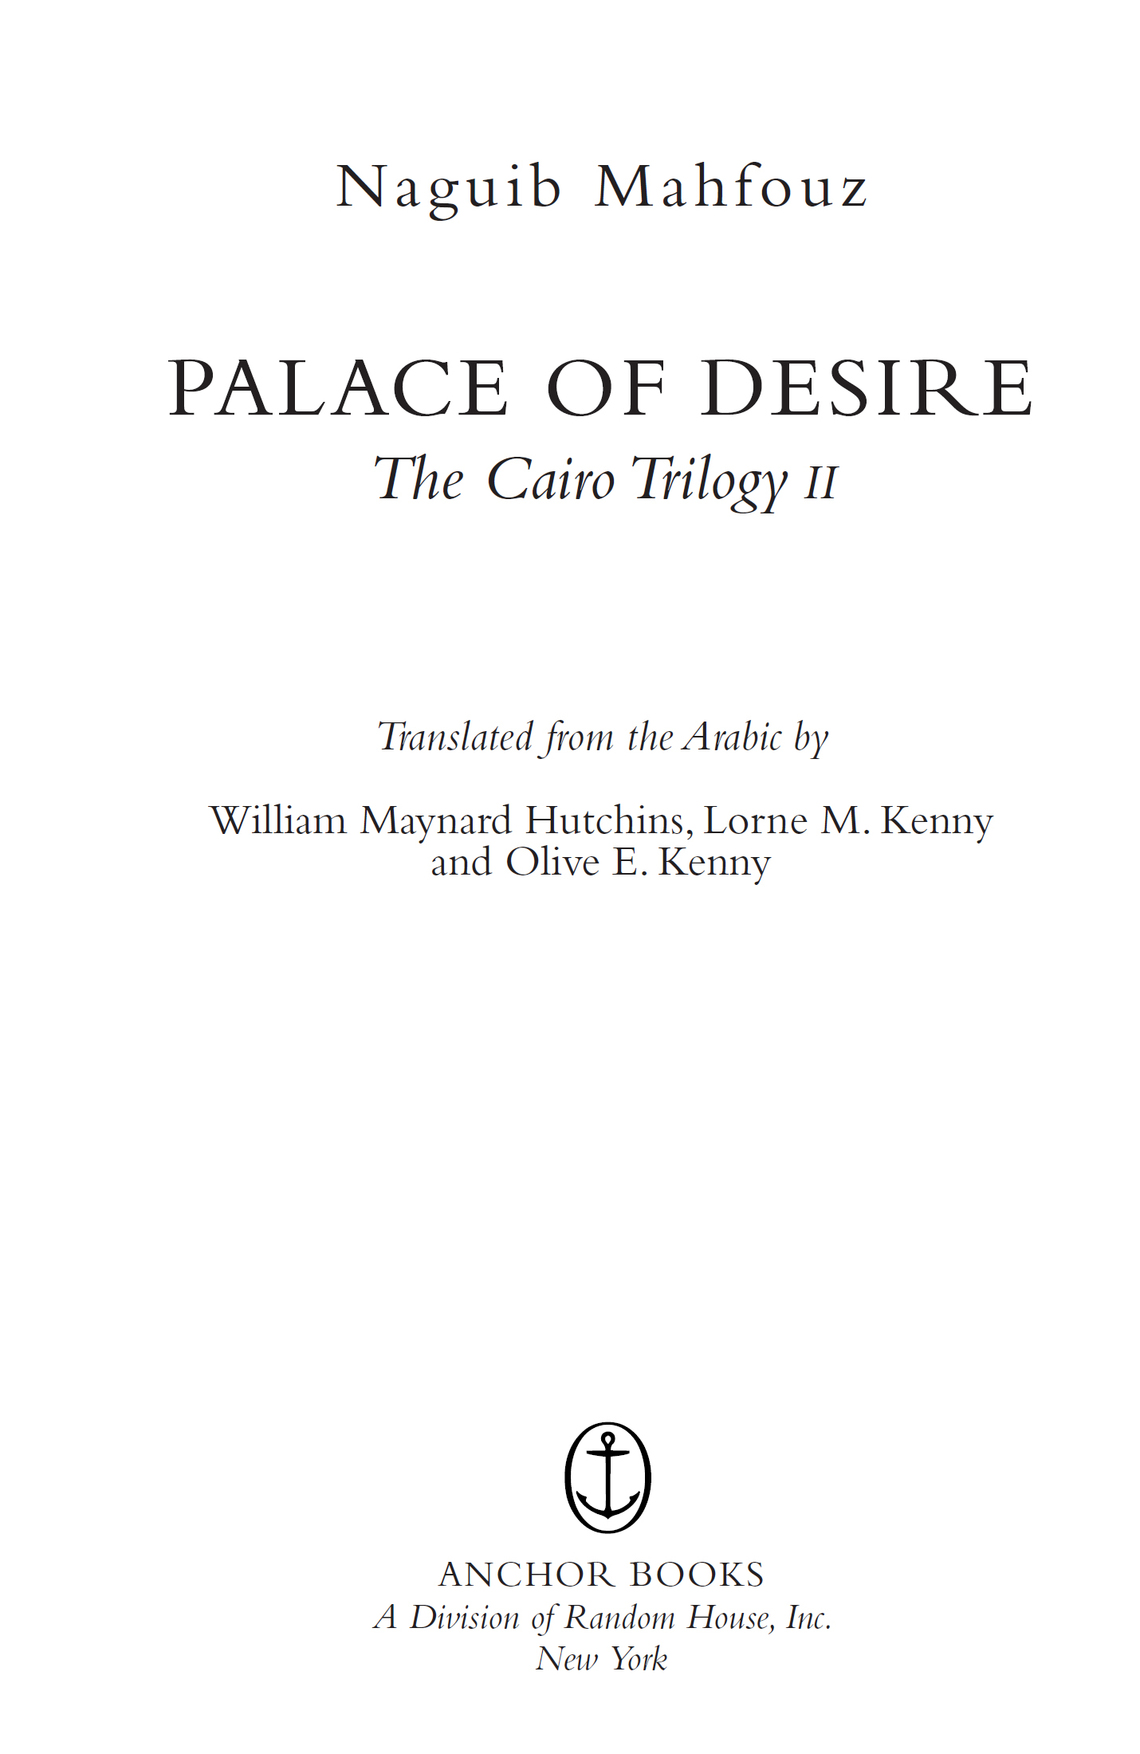 image of the title page